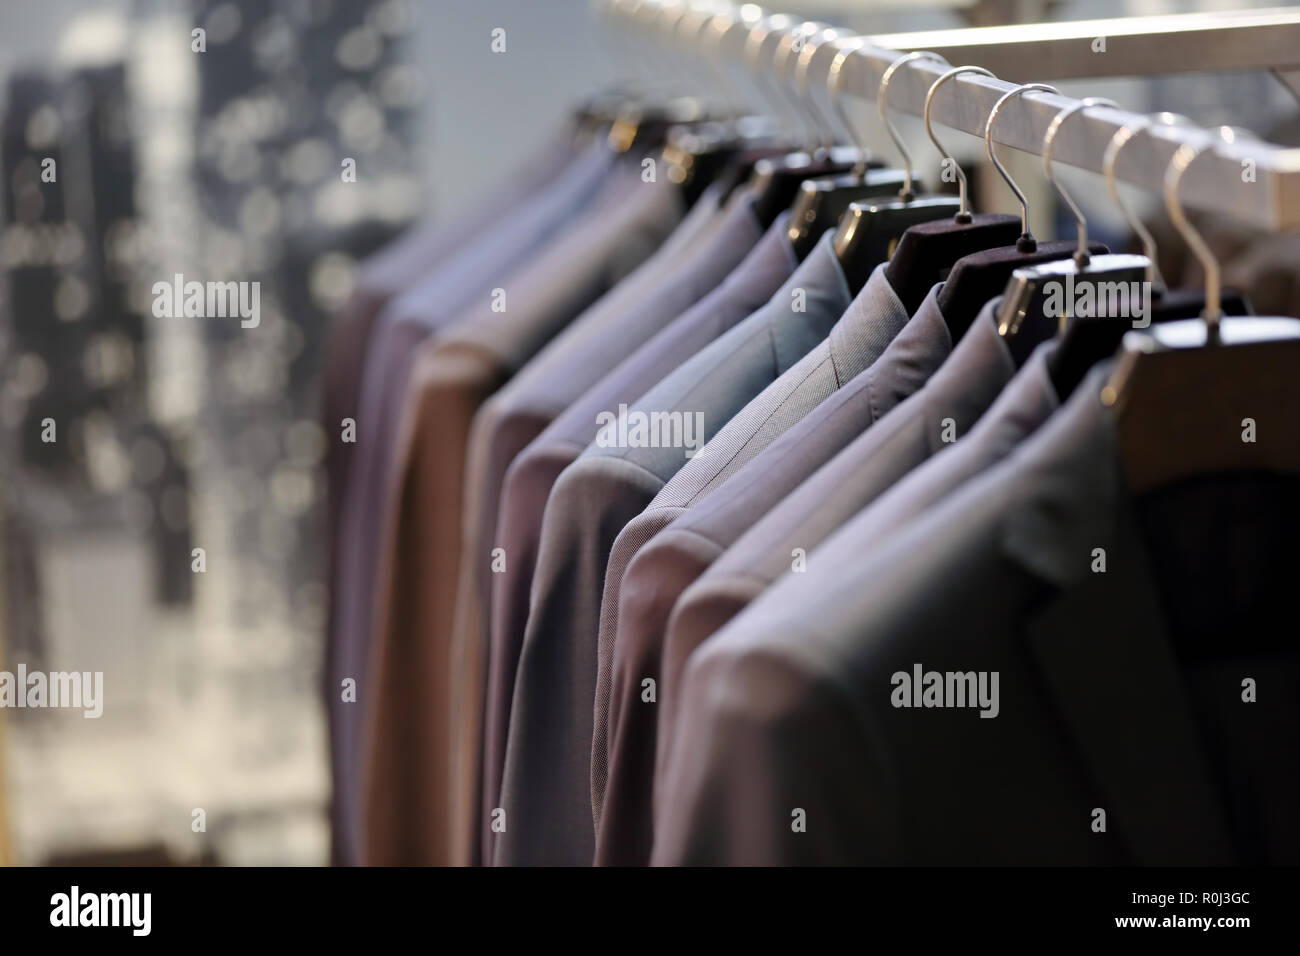 Row of suits on a hanger in store for sale and empty space for text Stock Photo